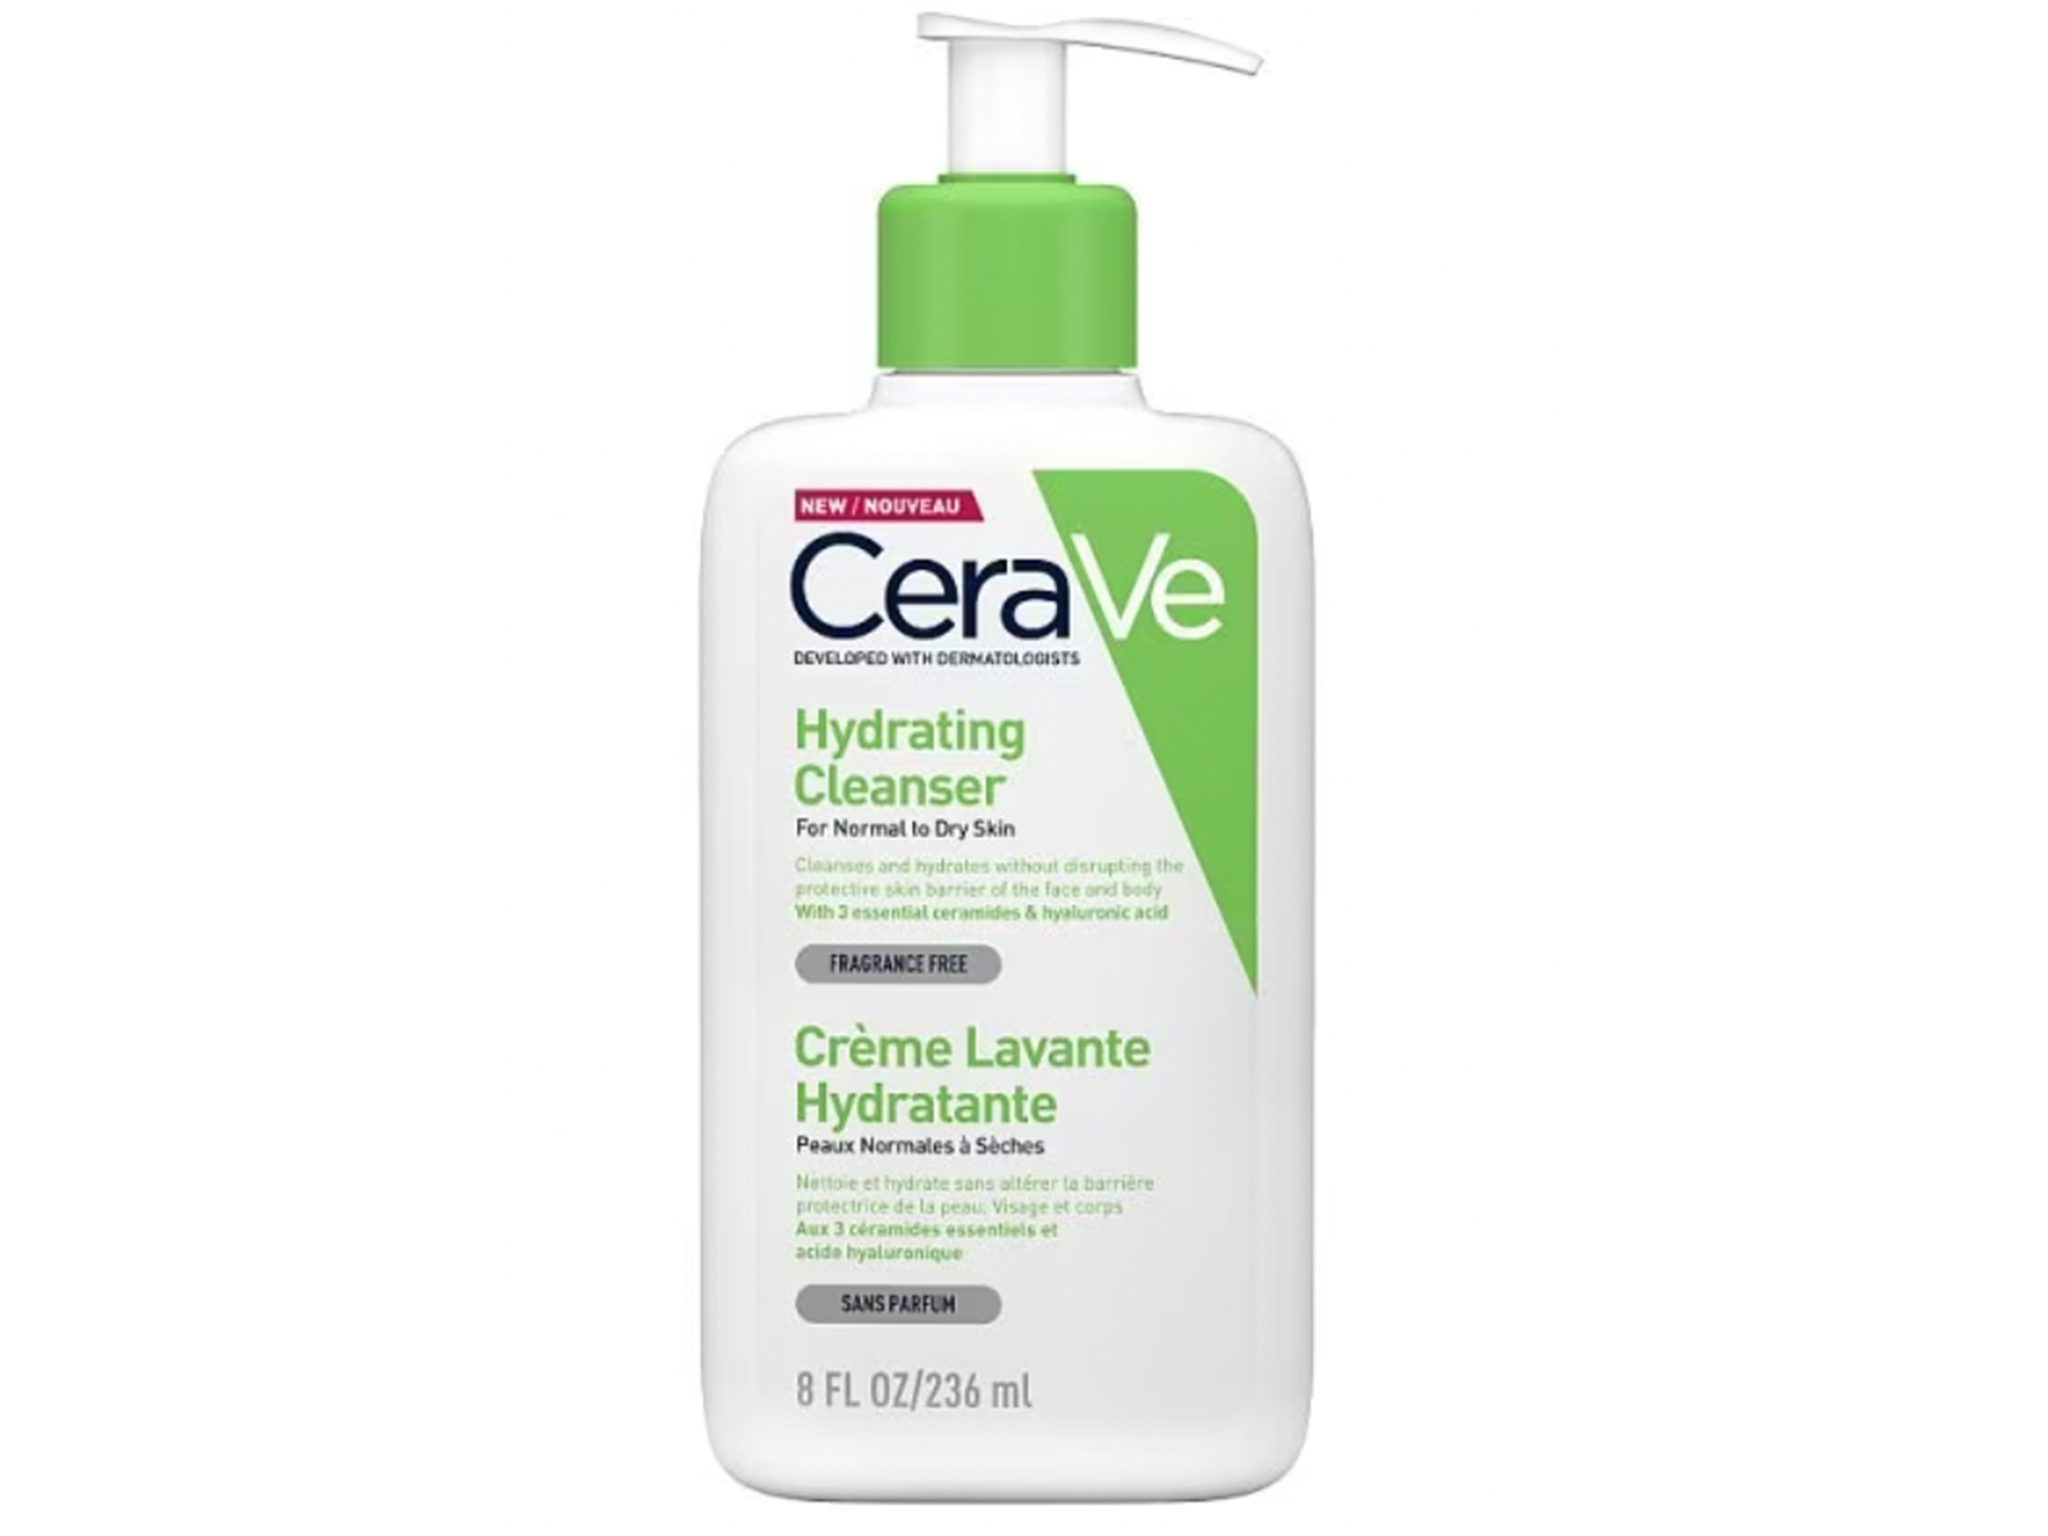 bargain beauty buys CeraVe hydrating cleanser